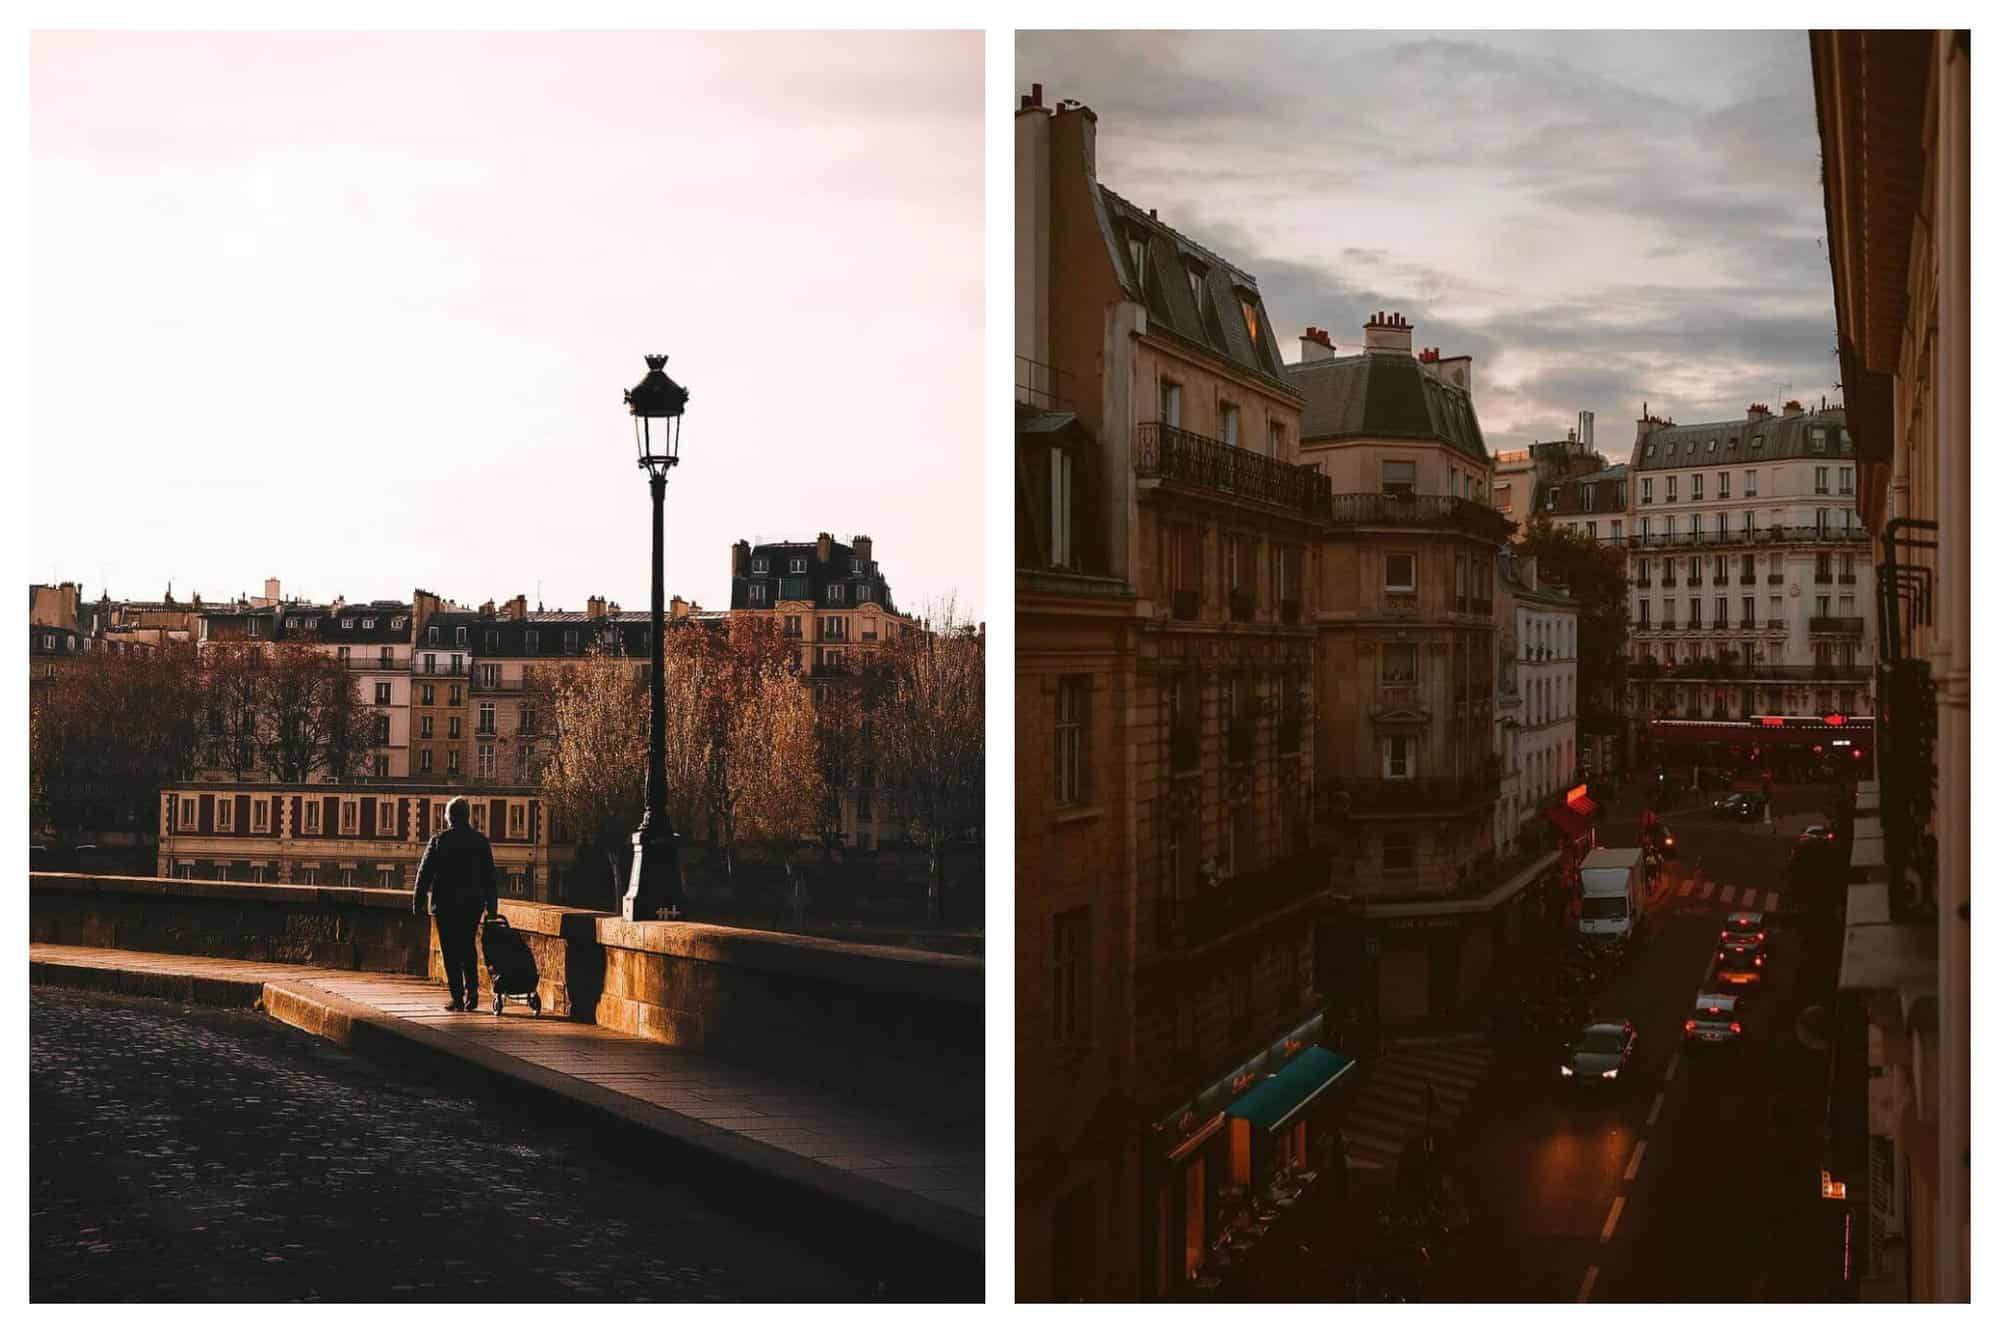 Left: someone walking on a sidewalk across a bridge in Paris. They have a shopping caddy with them. Parisian buildings can be seen in the background and there is an old-fashioned street lamp visible to the right. Right: a street in Paris. It is evening and the lights on restaurants, shops, and cars in the street can be seen. Several buildings are in the picture.